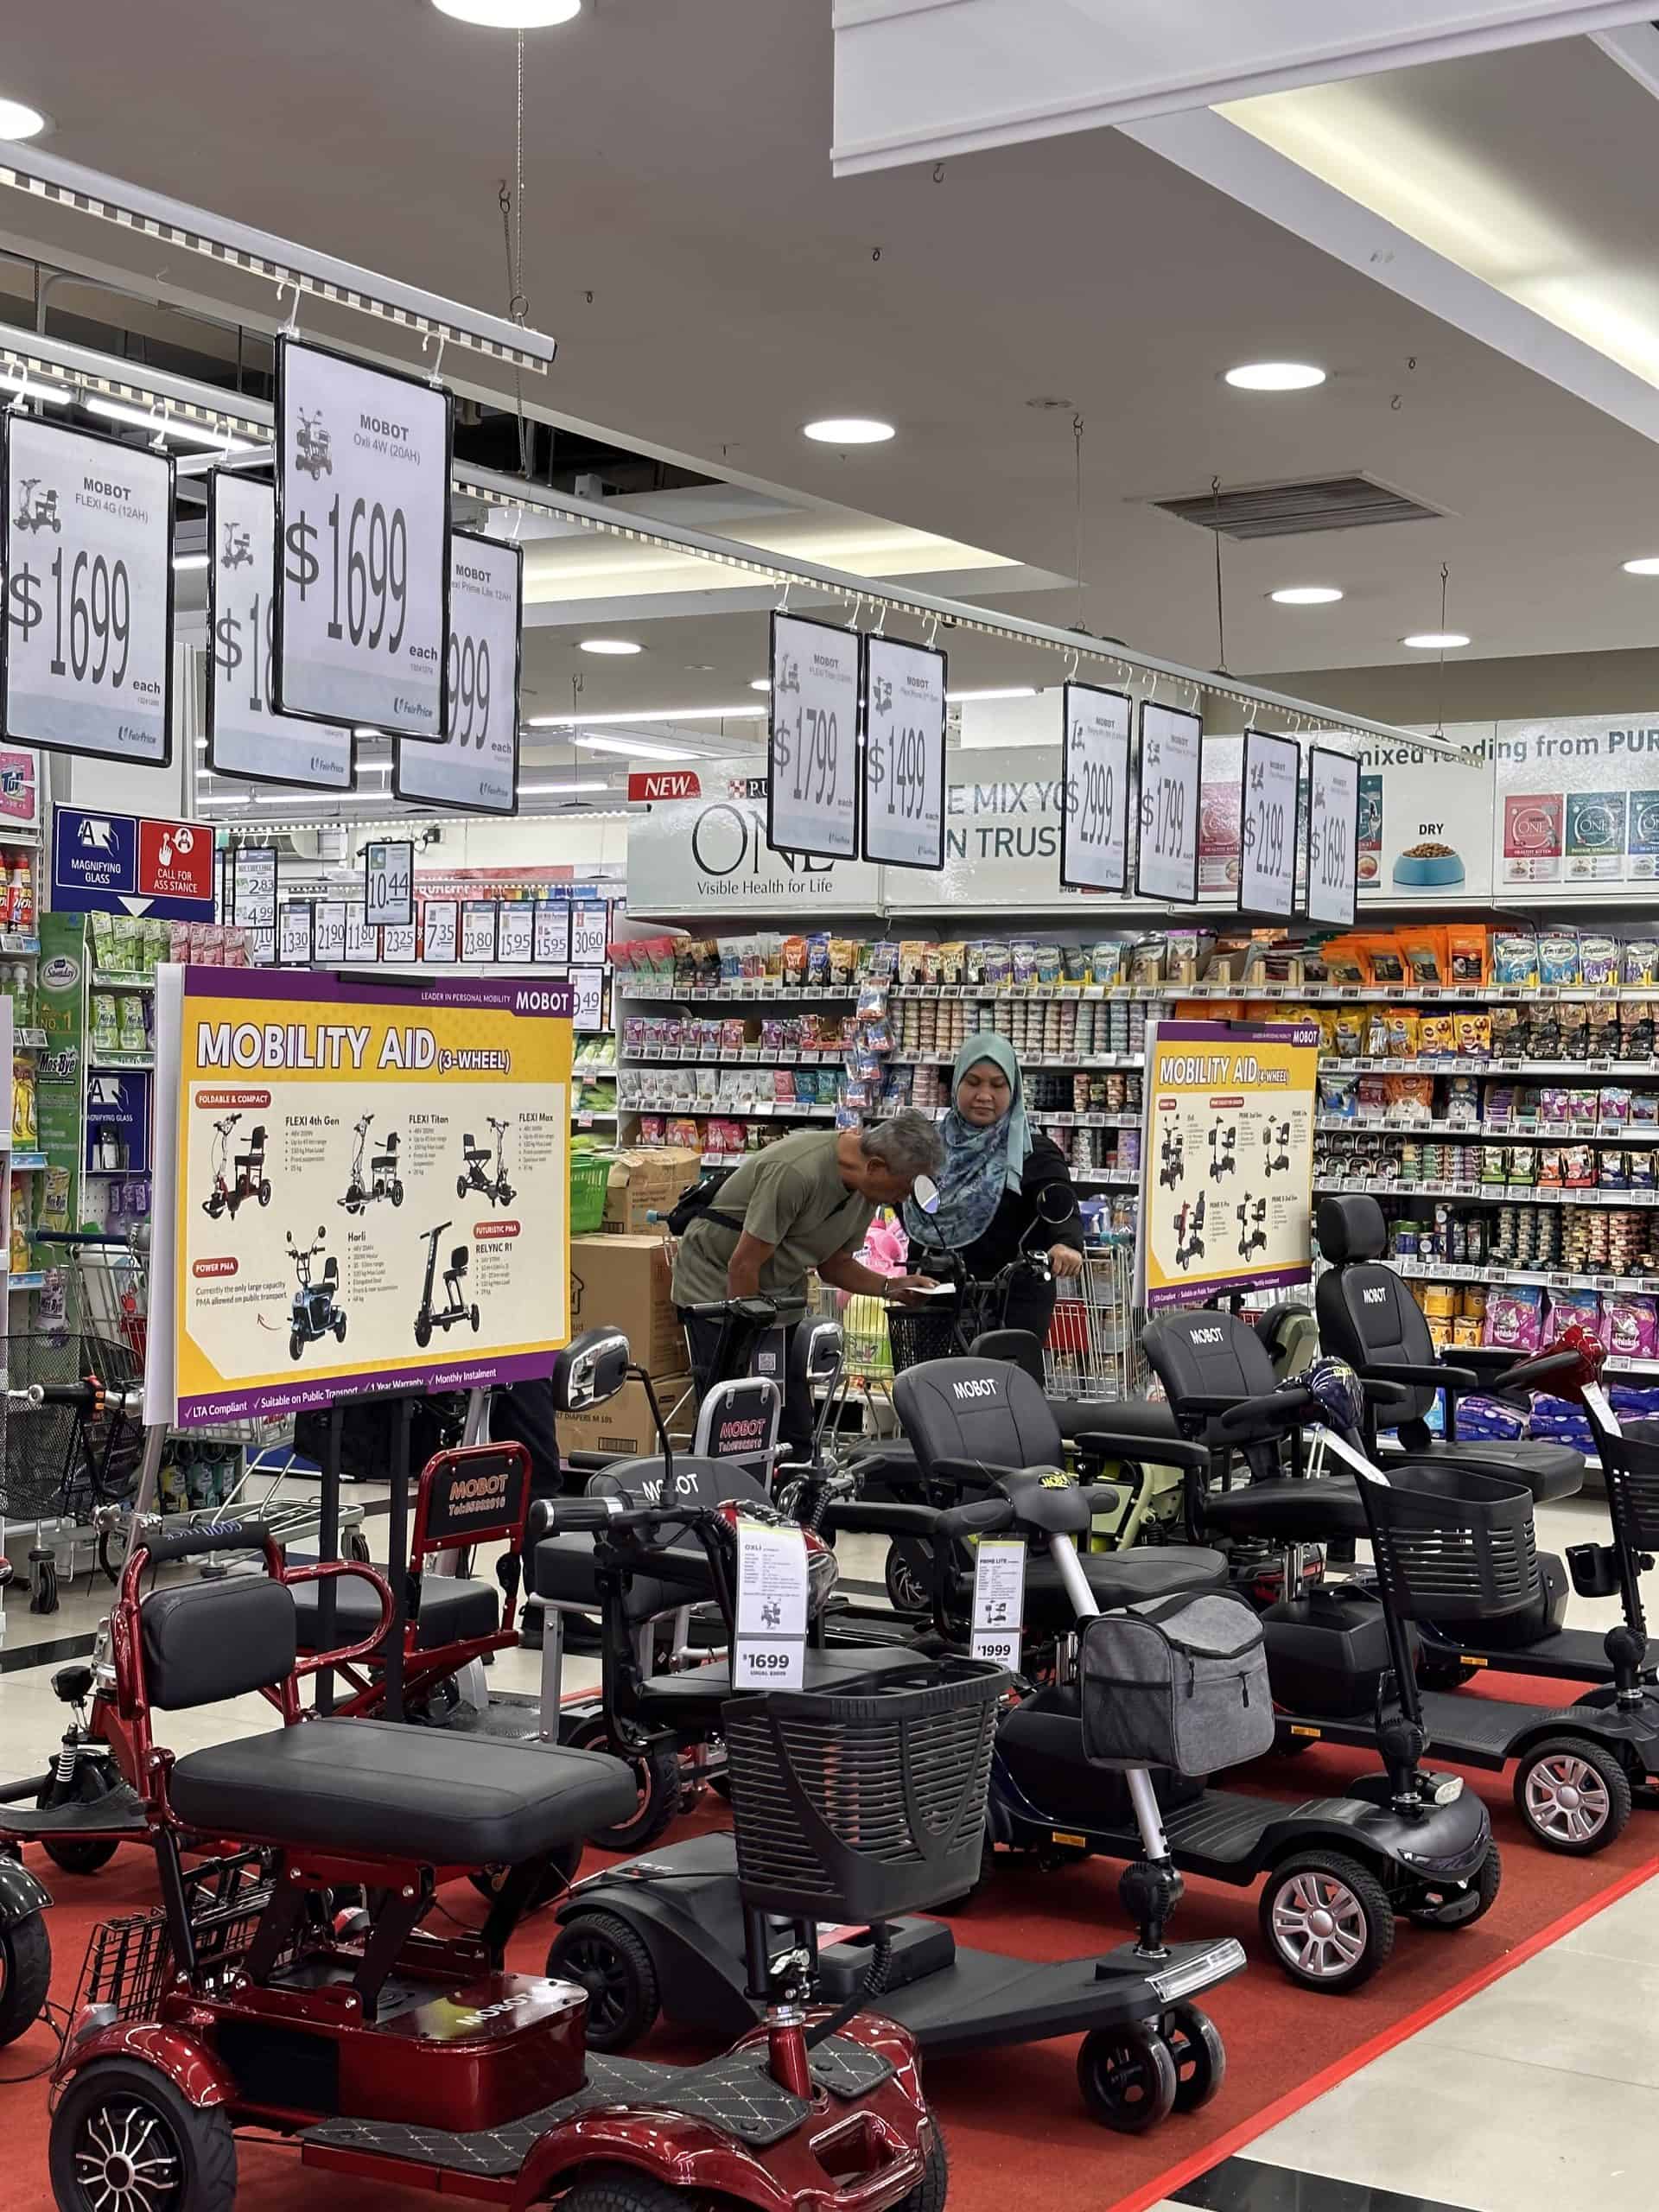 MOBOT PMA PARADISE BUKIT MERAH CENTRAL FAIRPRICE PMA MOBILITY SCOOTER ELECTRIC WHEELCHAIR